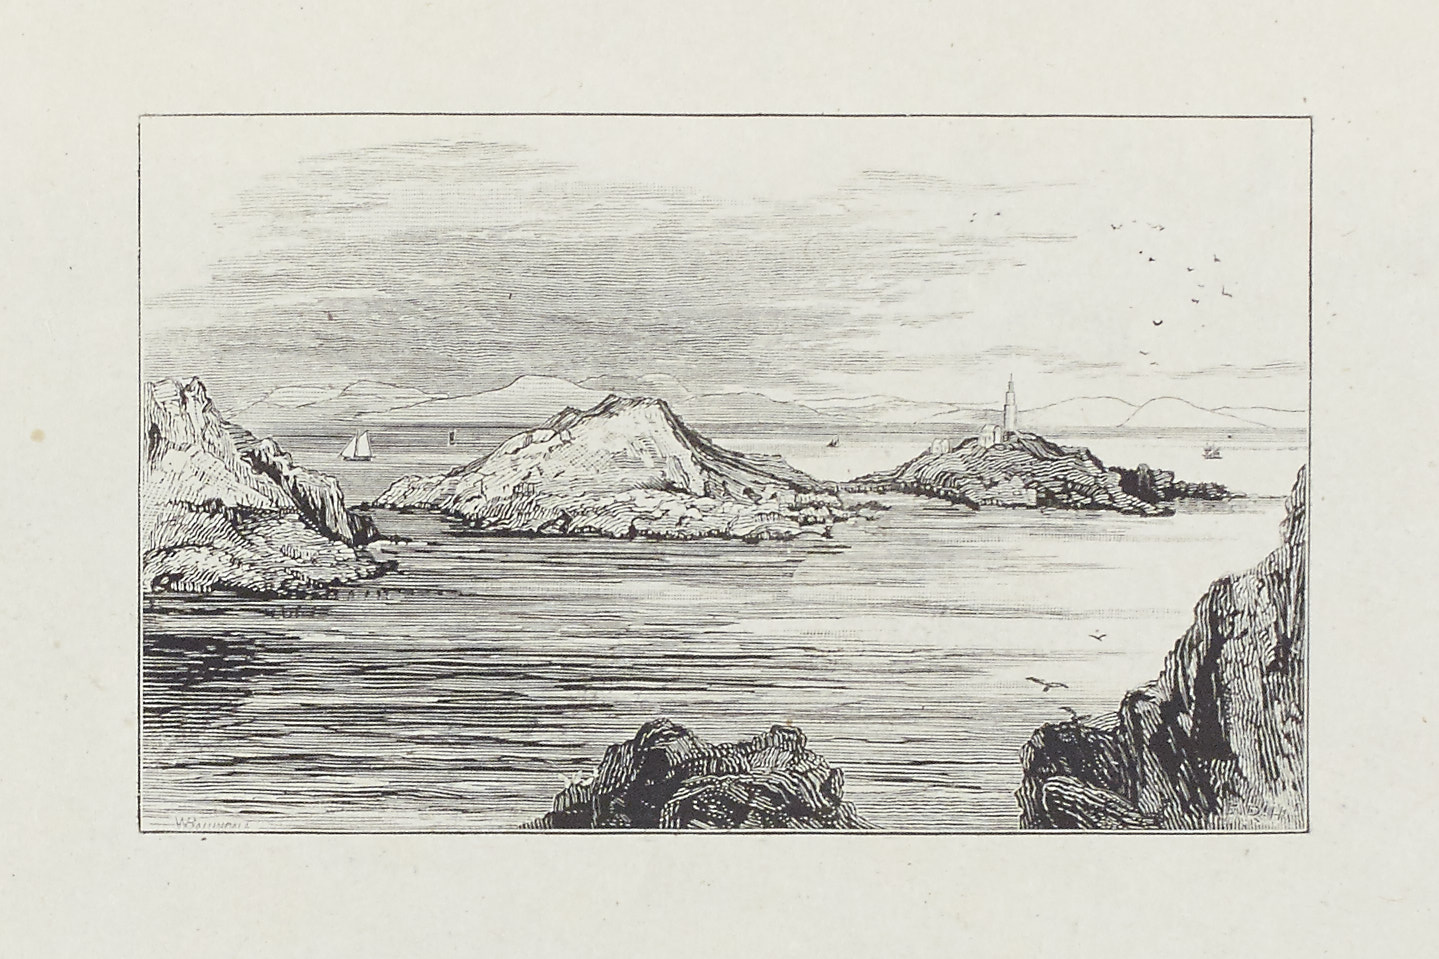 Engraving of seascape with Mumbles Lighthouse on rocky headland